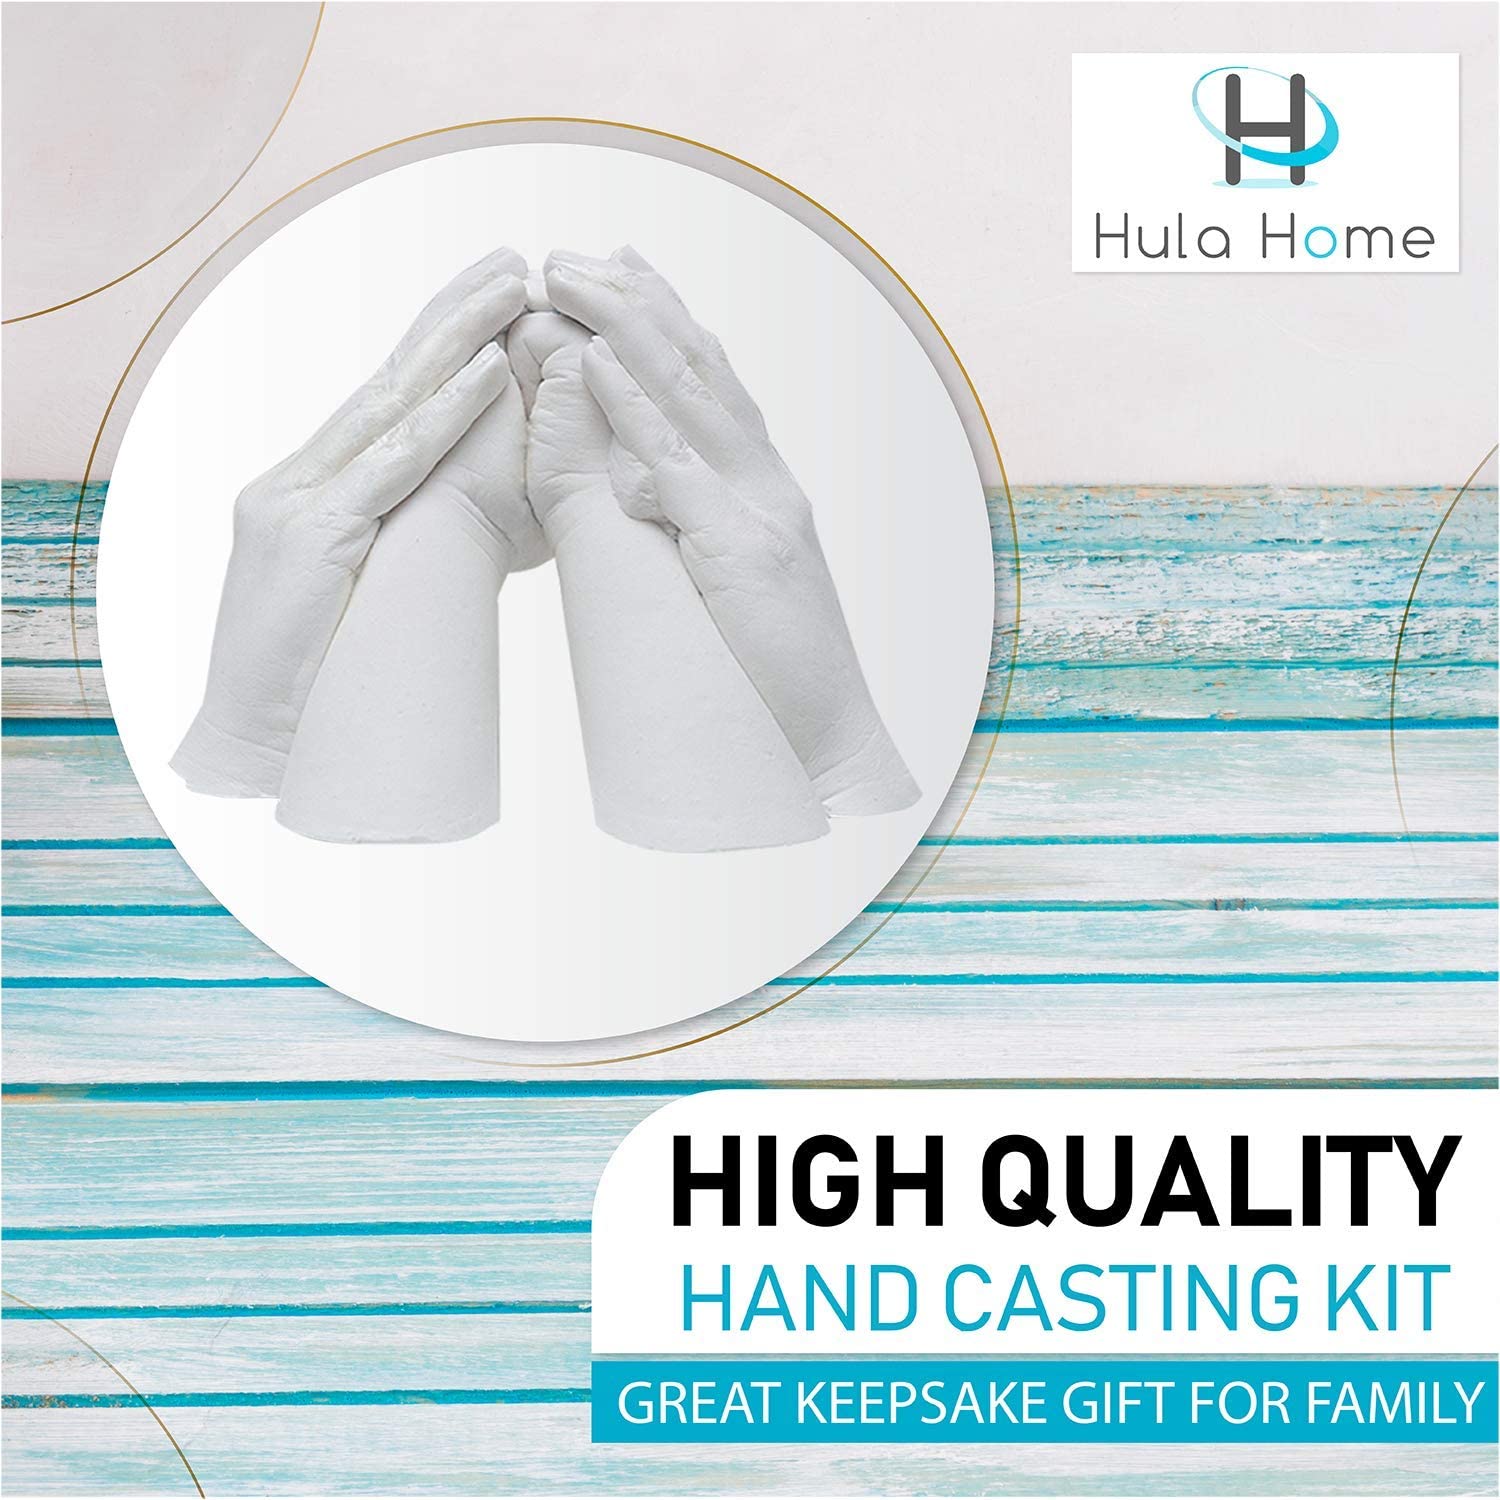  Hula Home Hand Casting Kit for Couples or Family